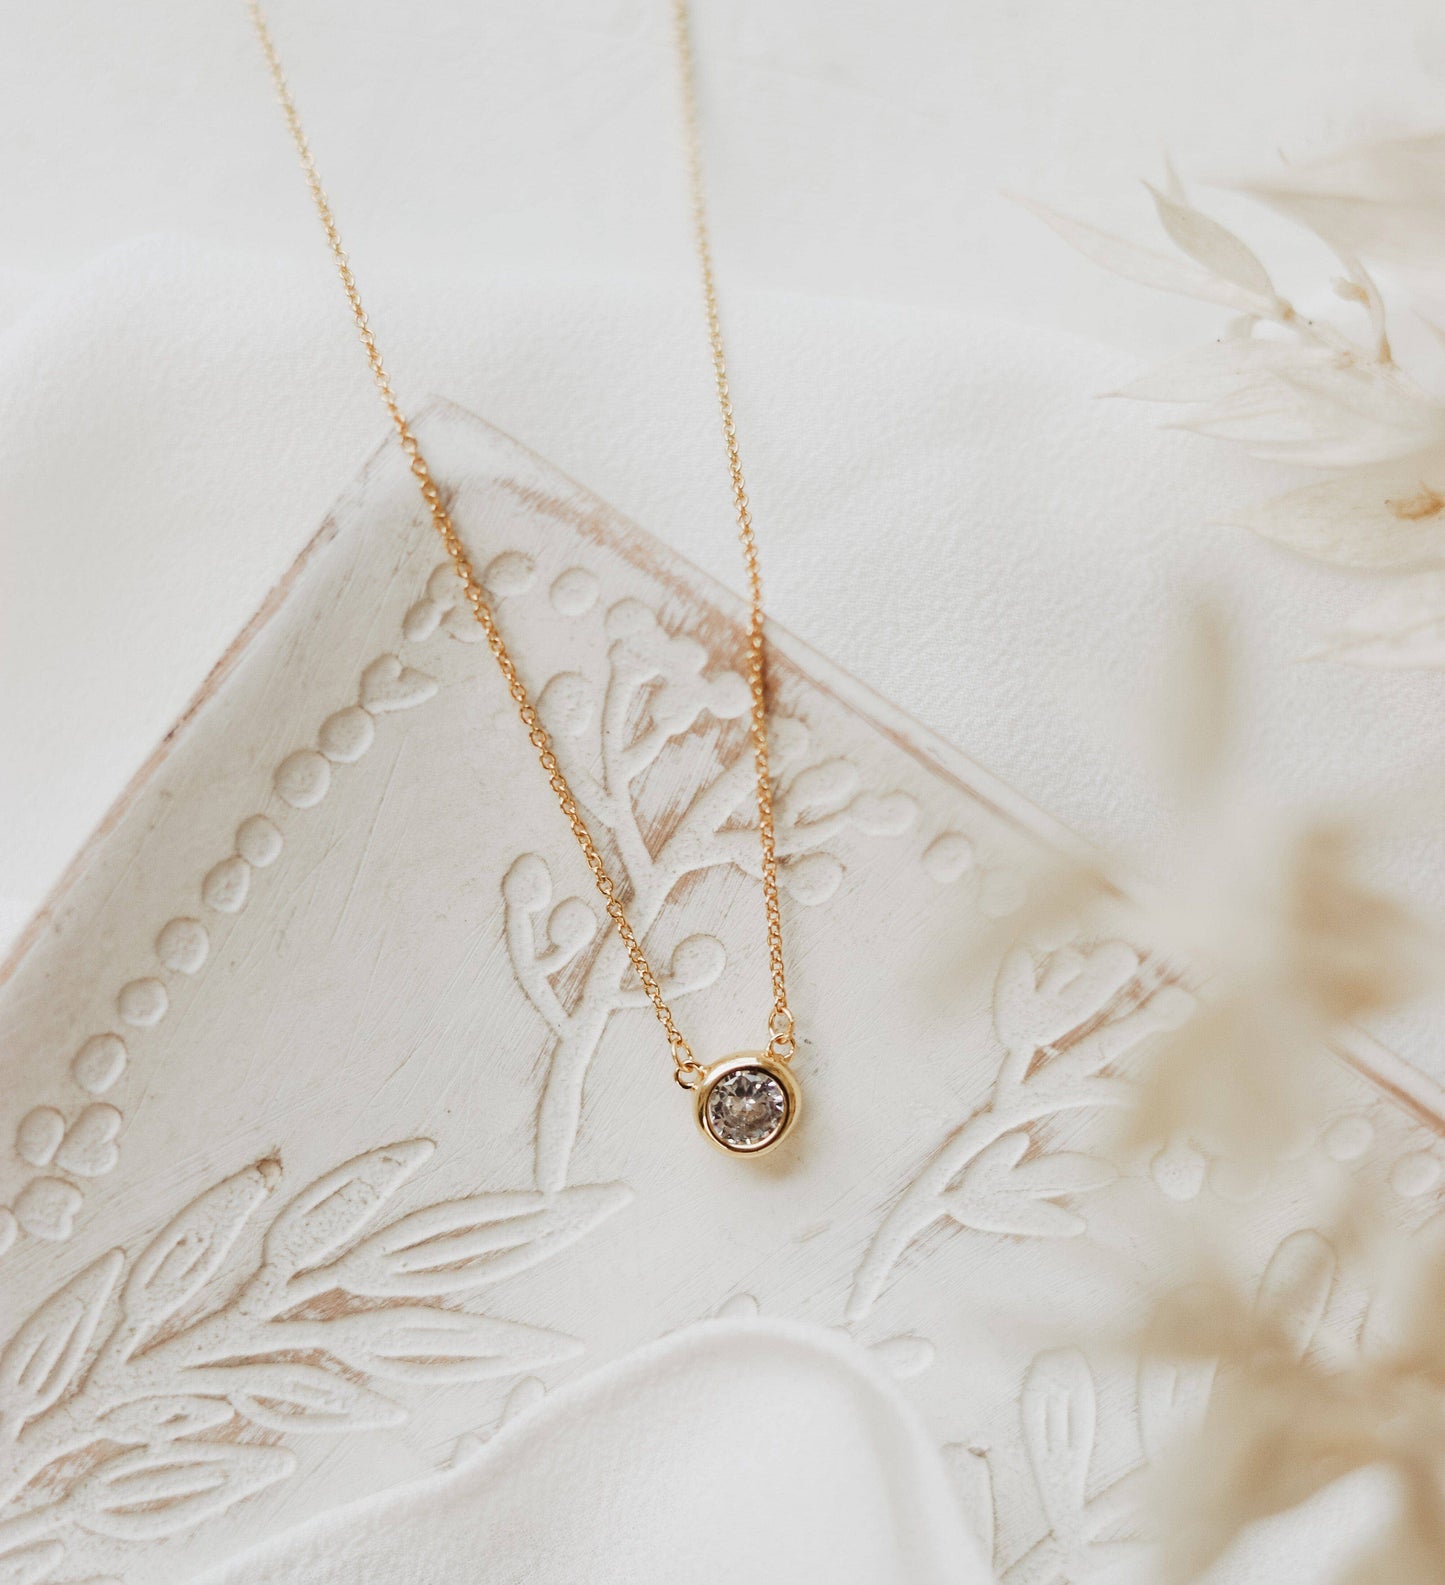 Silver and Gold CZ pendant necklace